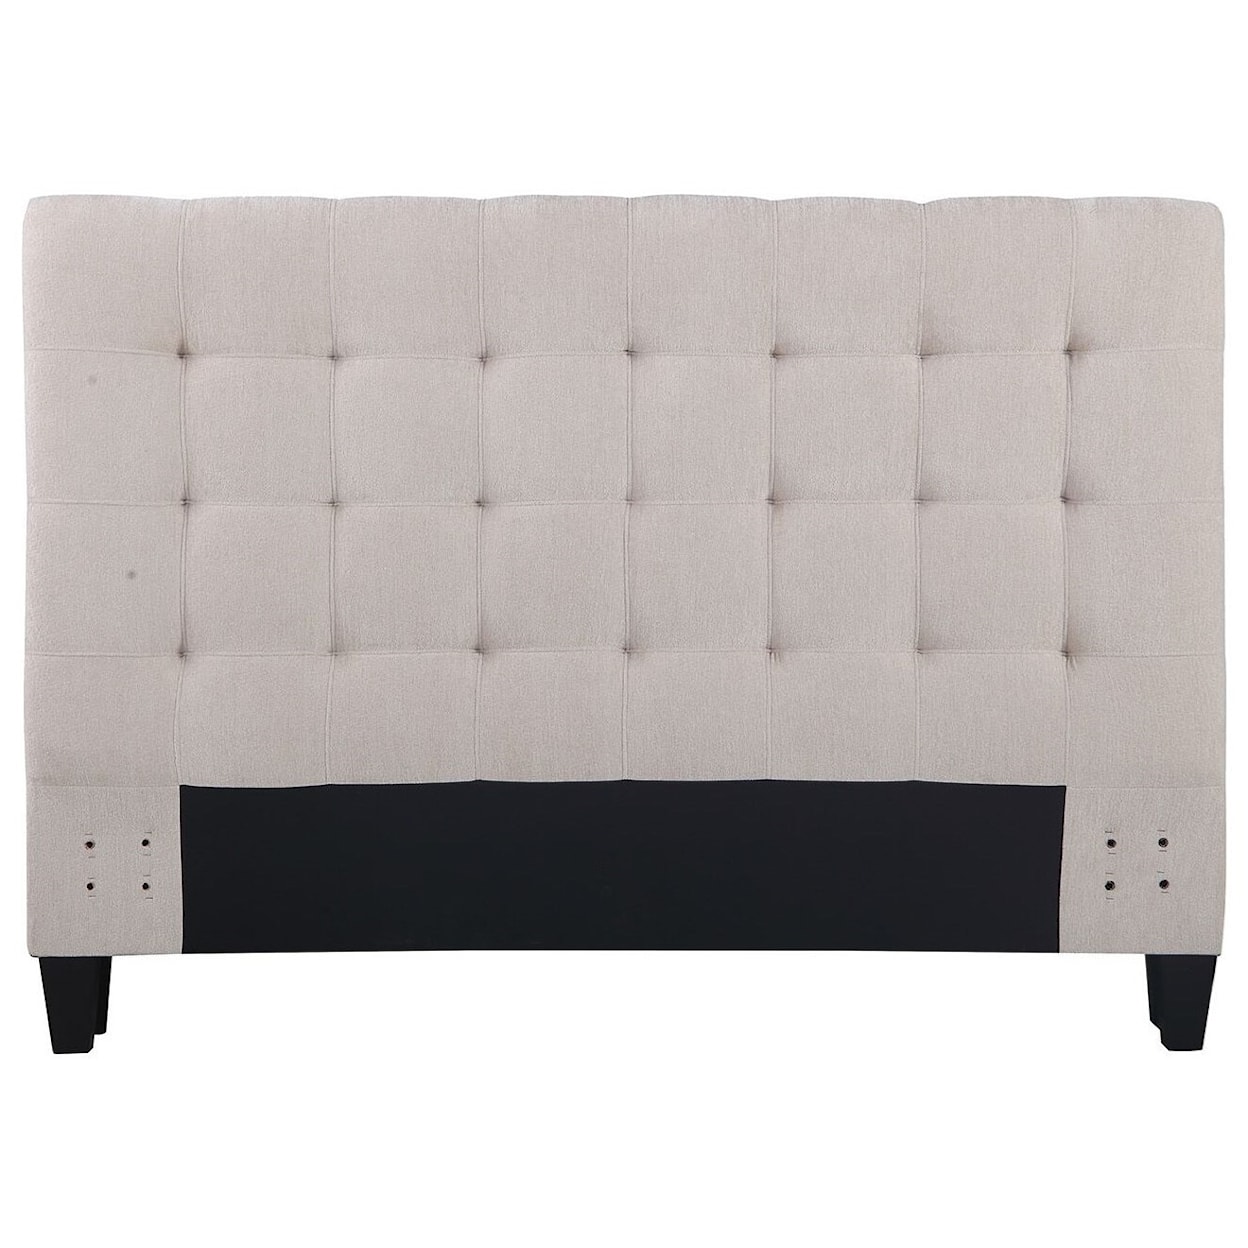 PH Premium Collection Jody Queen Upholstered Bed